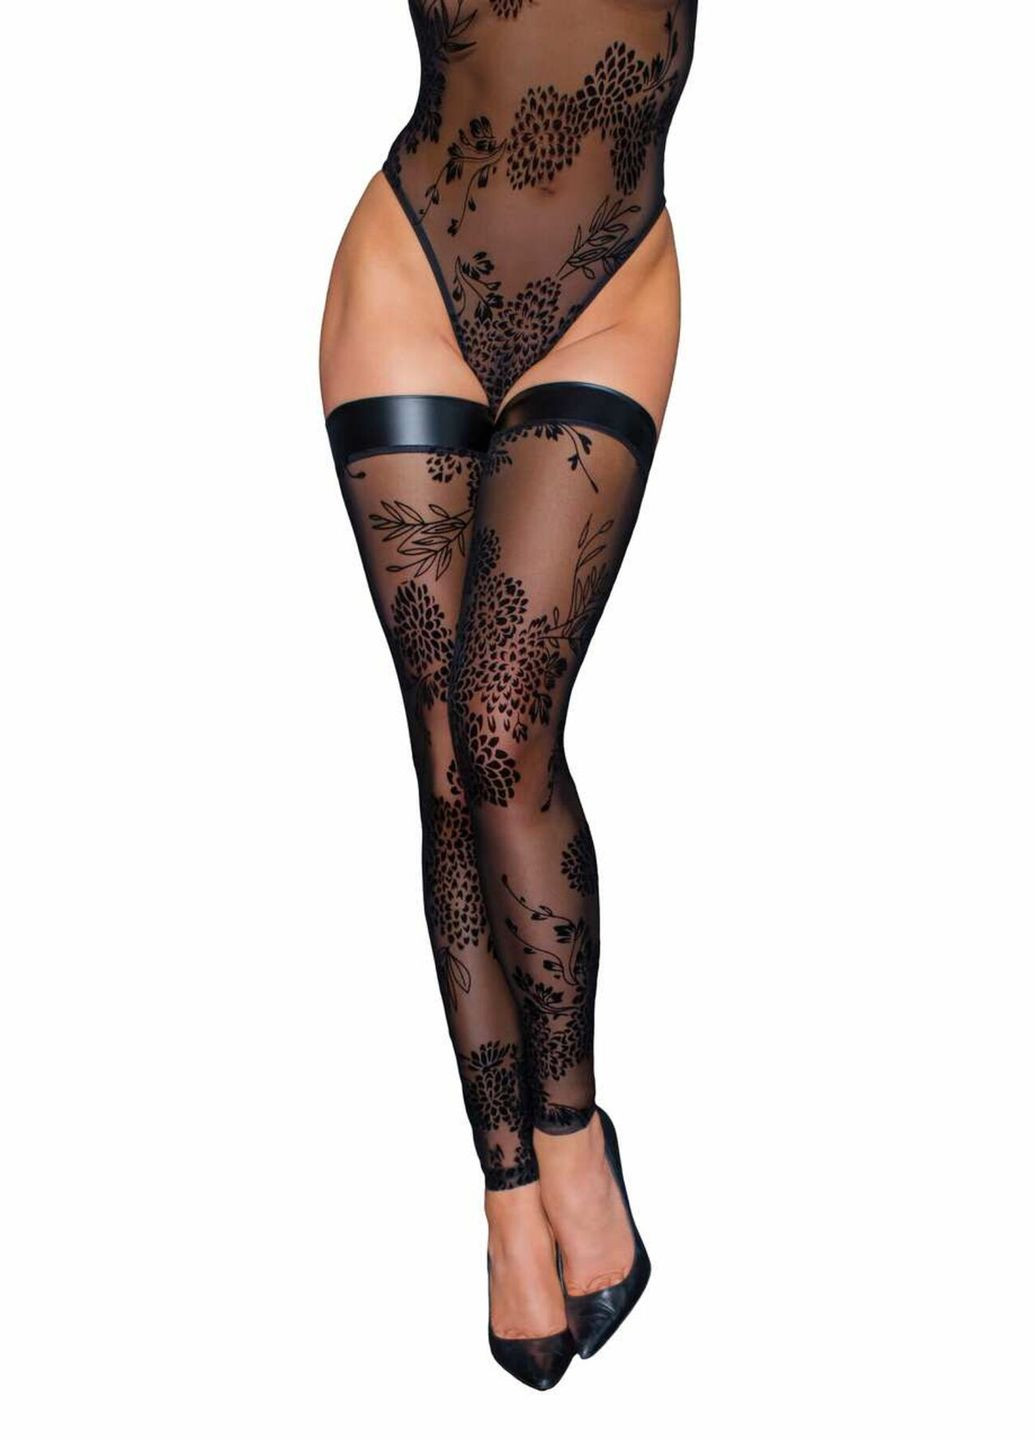 Панчохи F243 Tulle stockings with patterned flock embroidery – Noir Handmade (297587365)